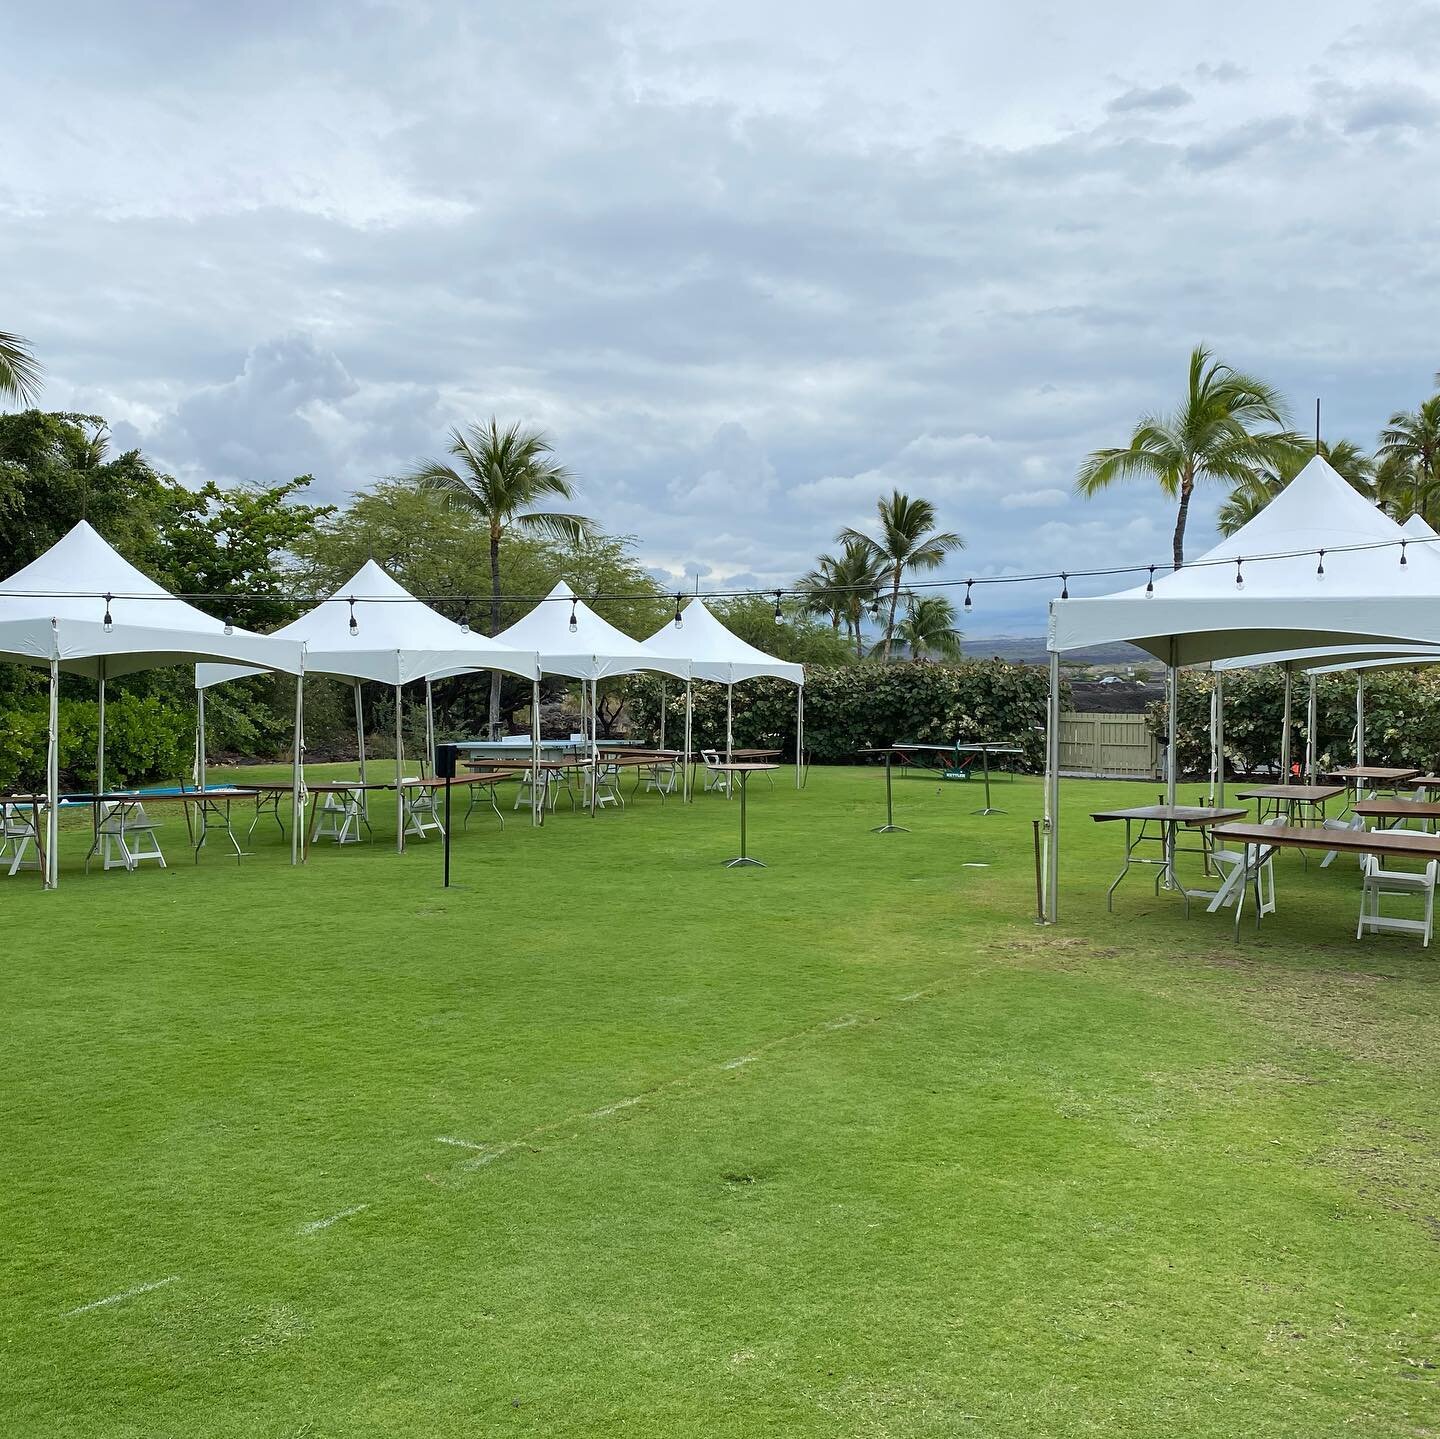 10x10s with tables, chairs, and linens for corporate event at @lavalavabeachclub for Island of Hawaii Visitors Bureau. @bigislandtents